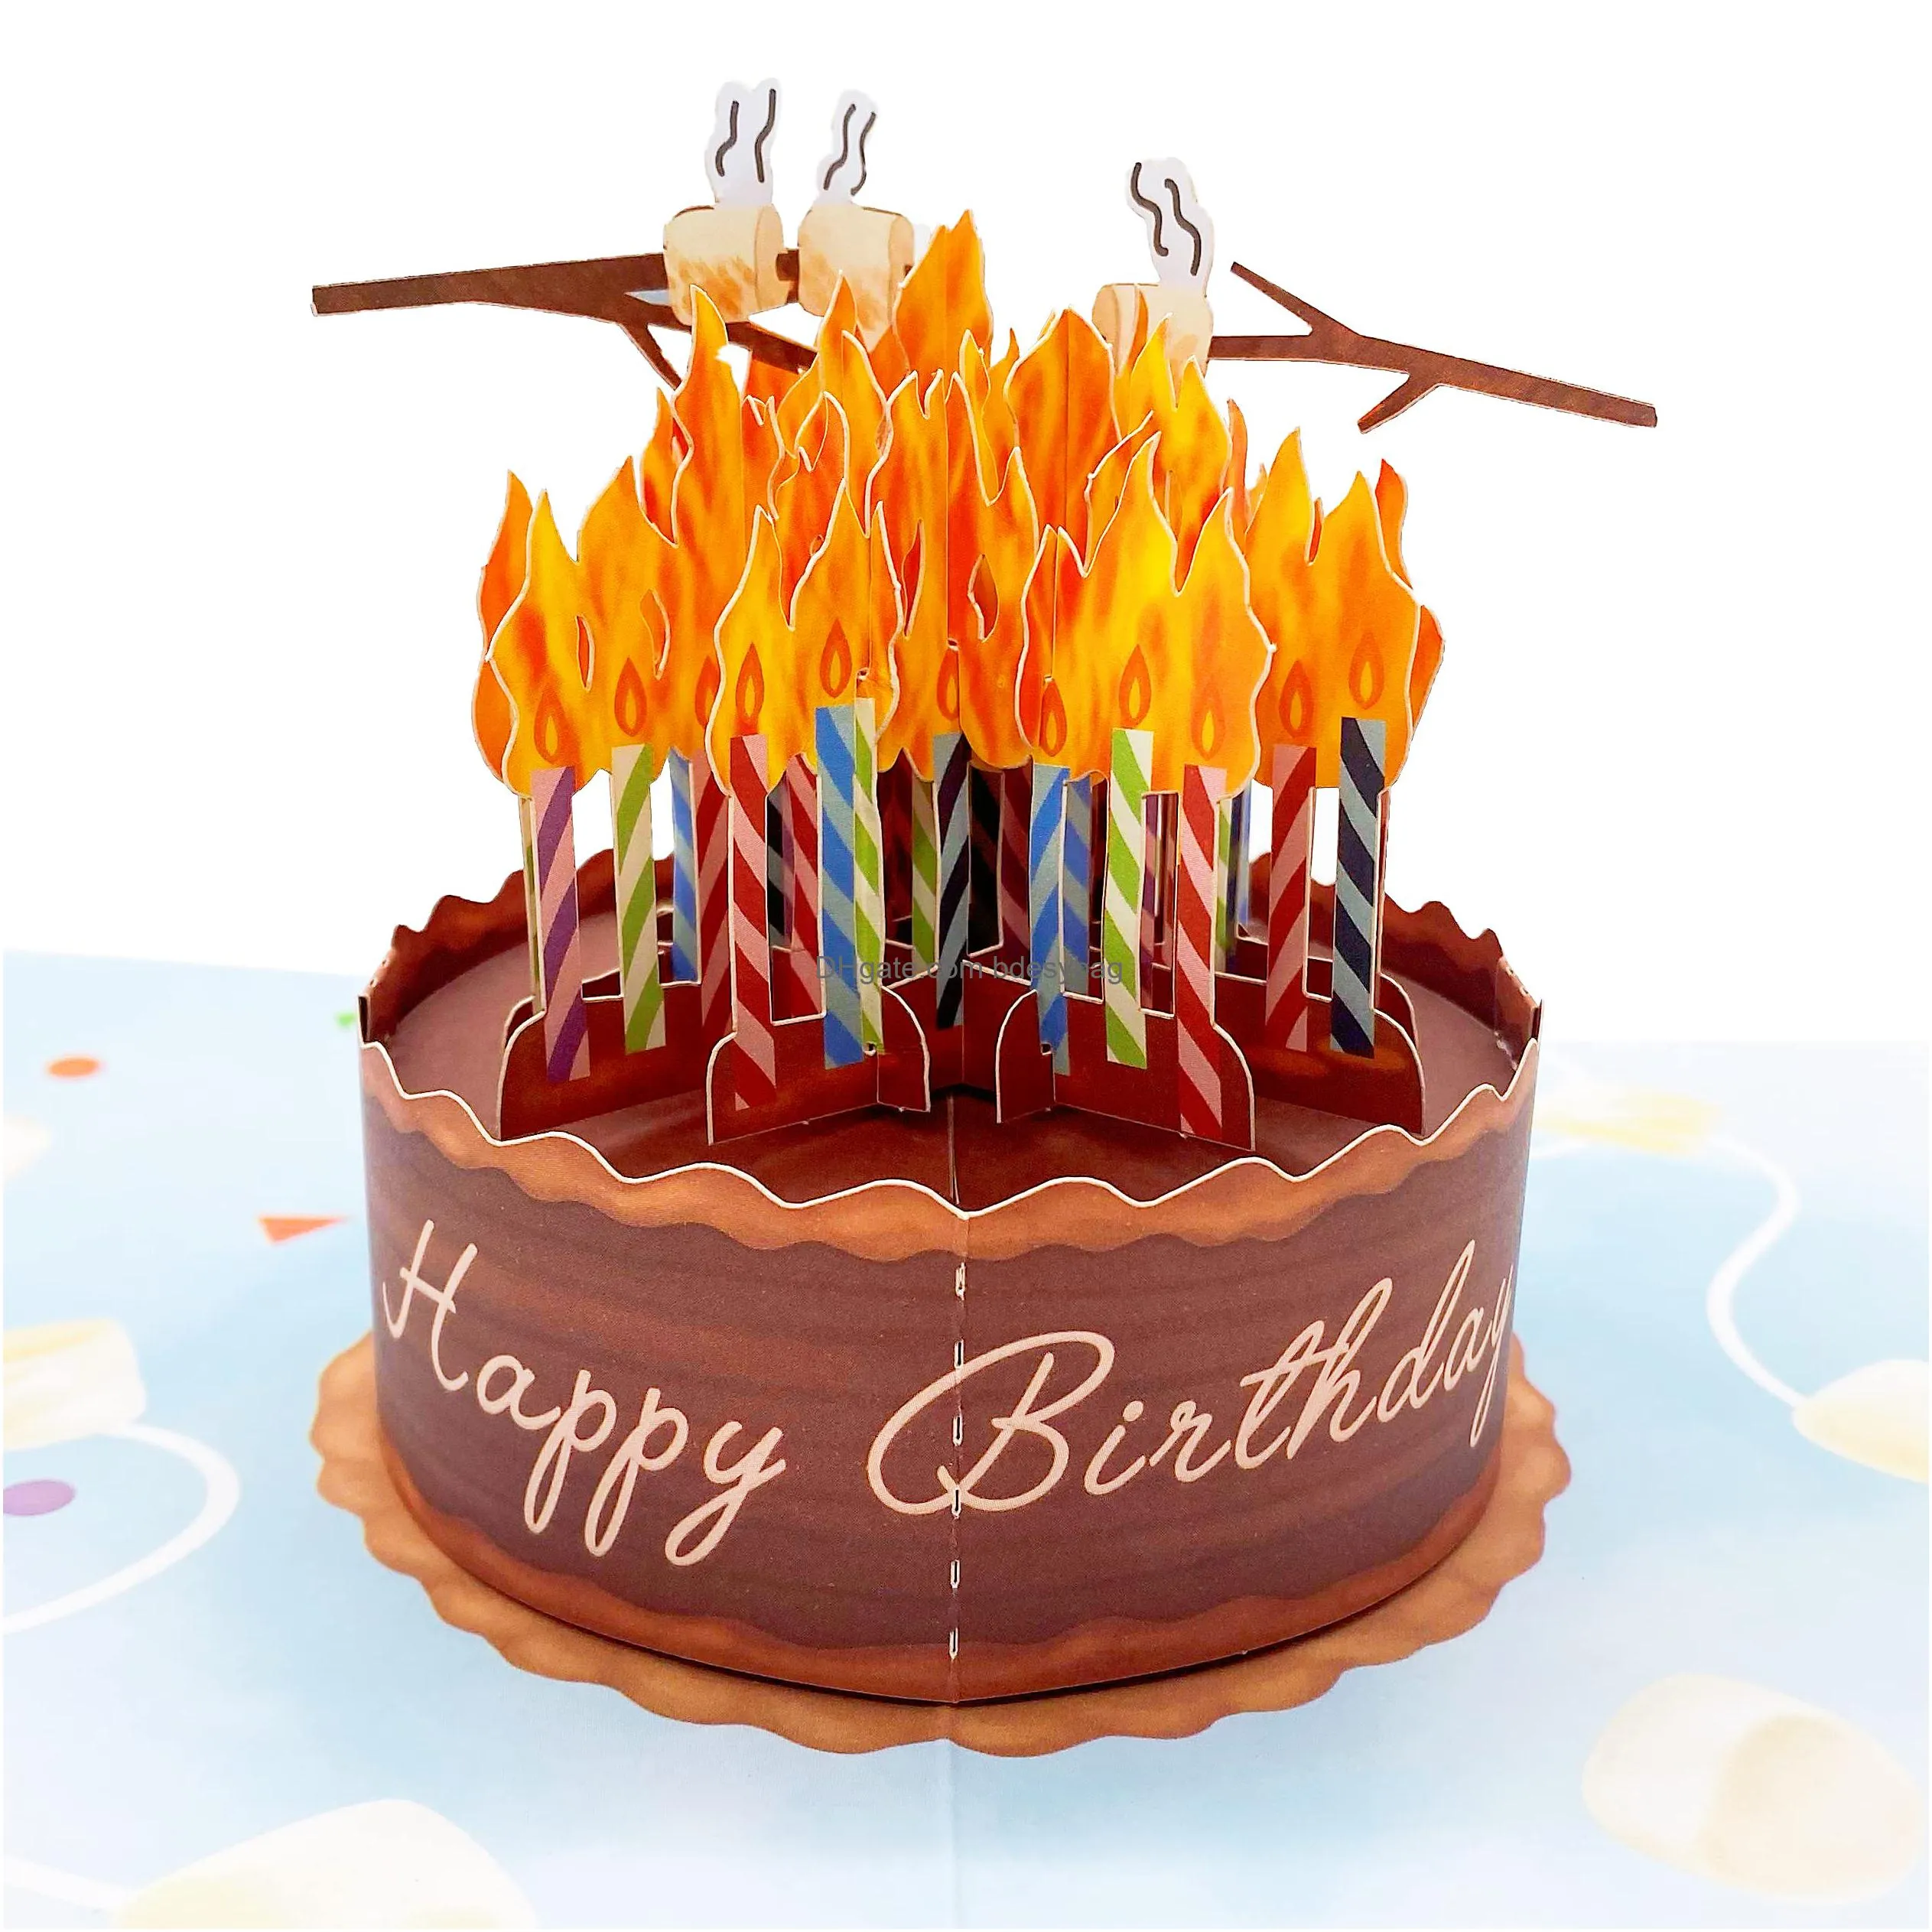 birthday cake on fire funny birthday card 3d greeting  up birthday card happy birthday card for men women her him husband wife with message note envelop size 7 x 5 inch